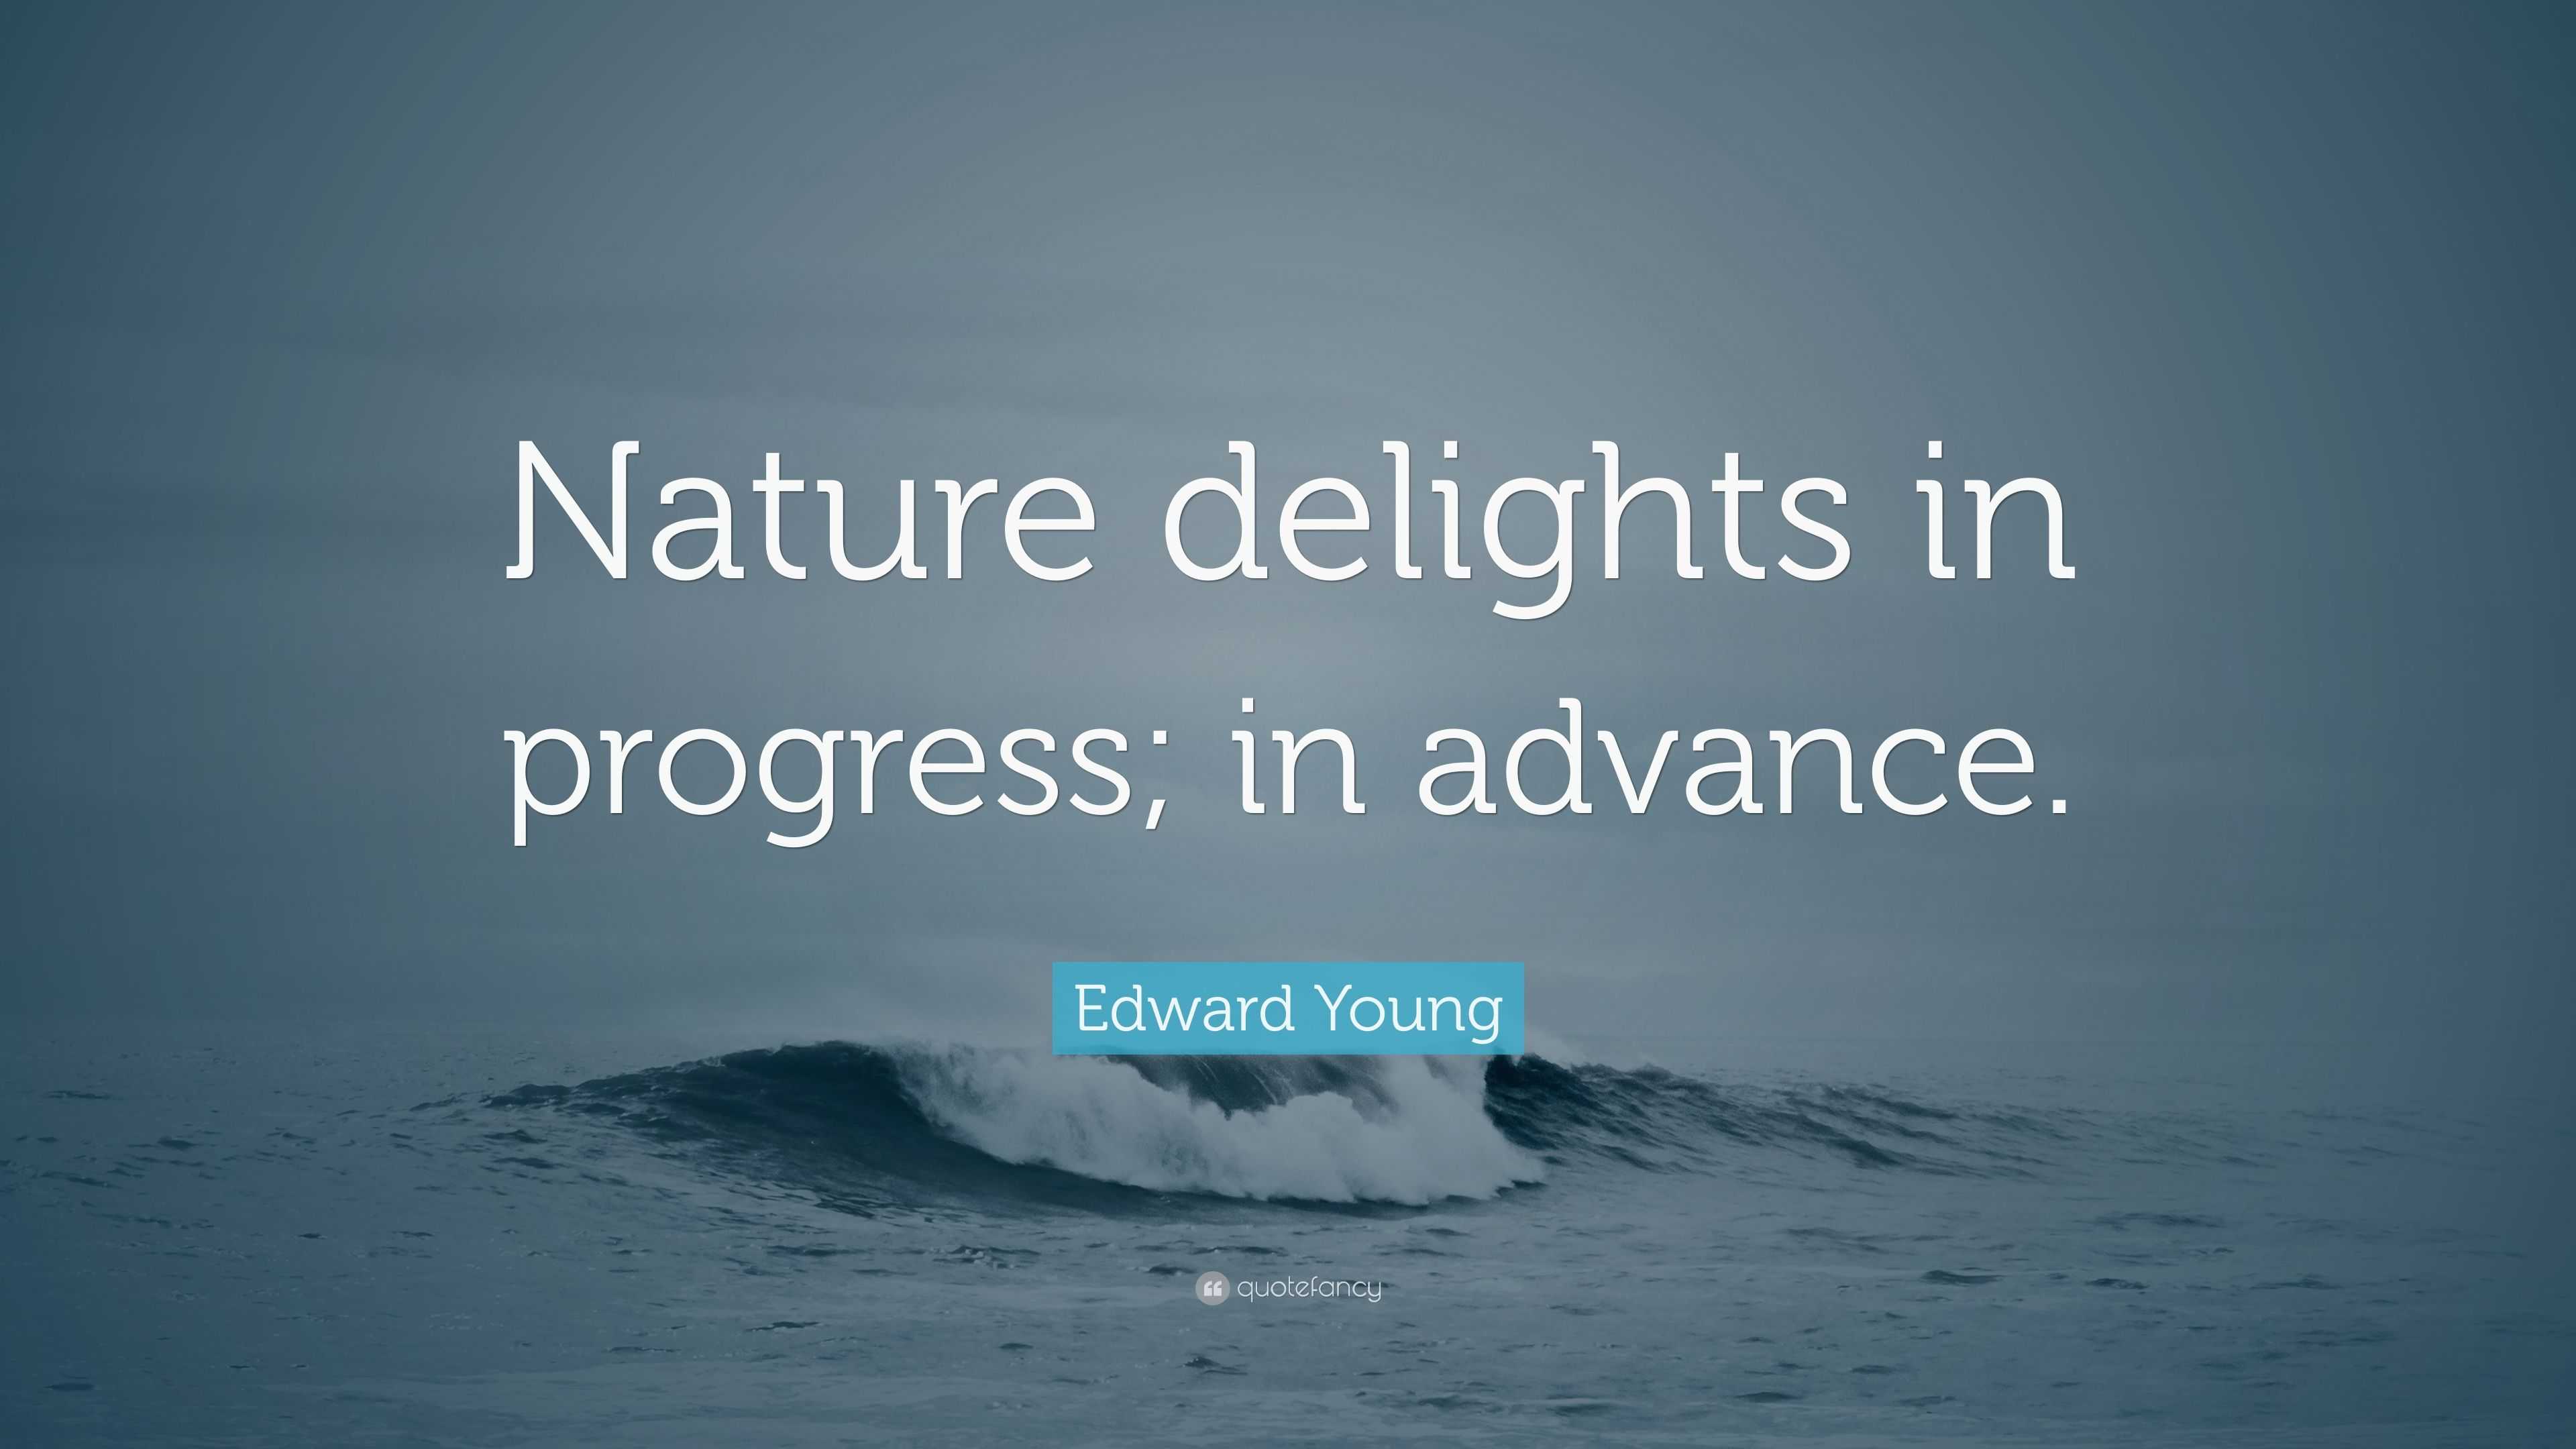 Edward Young Quote: “Nature delights in progress; in advance.”